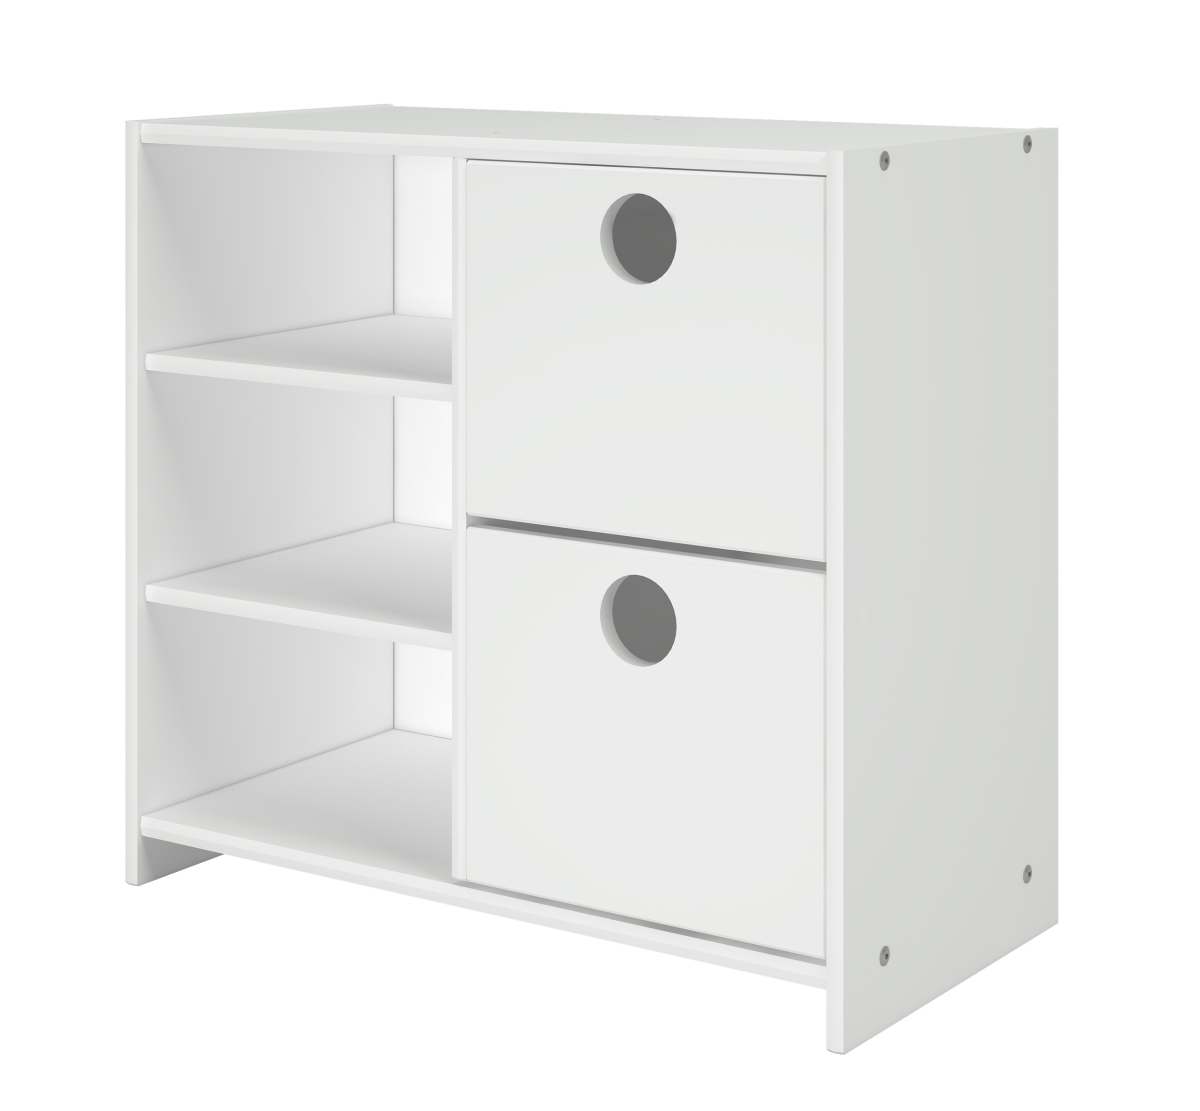 Pd-780c-tw 2 Drawer Chest With Shelves In White